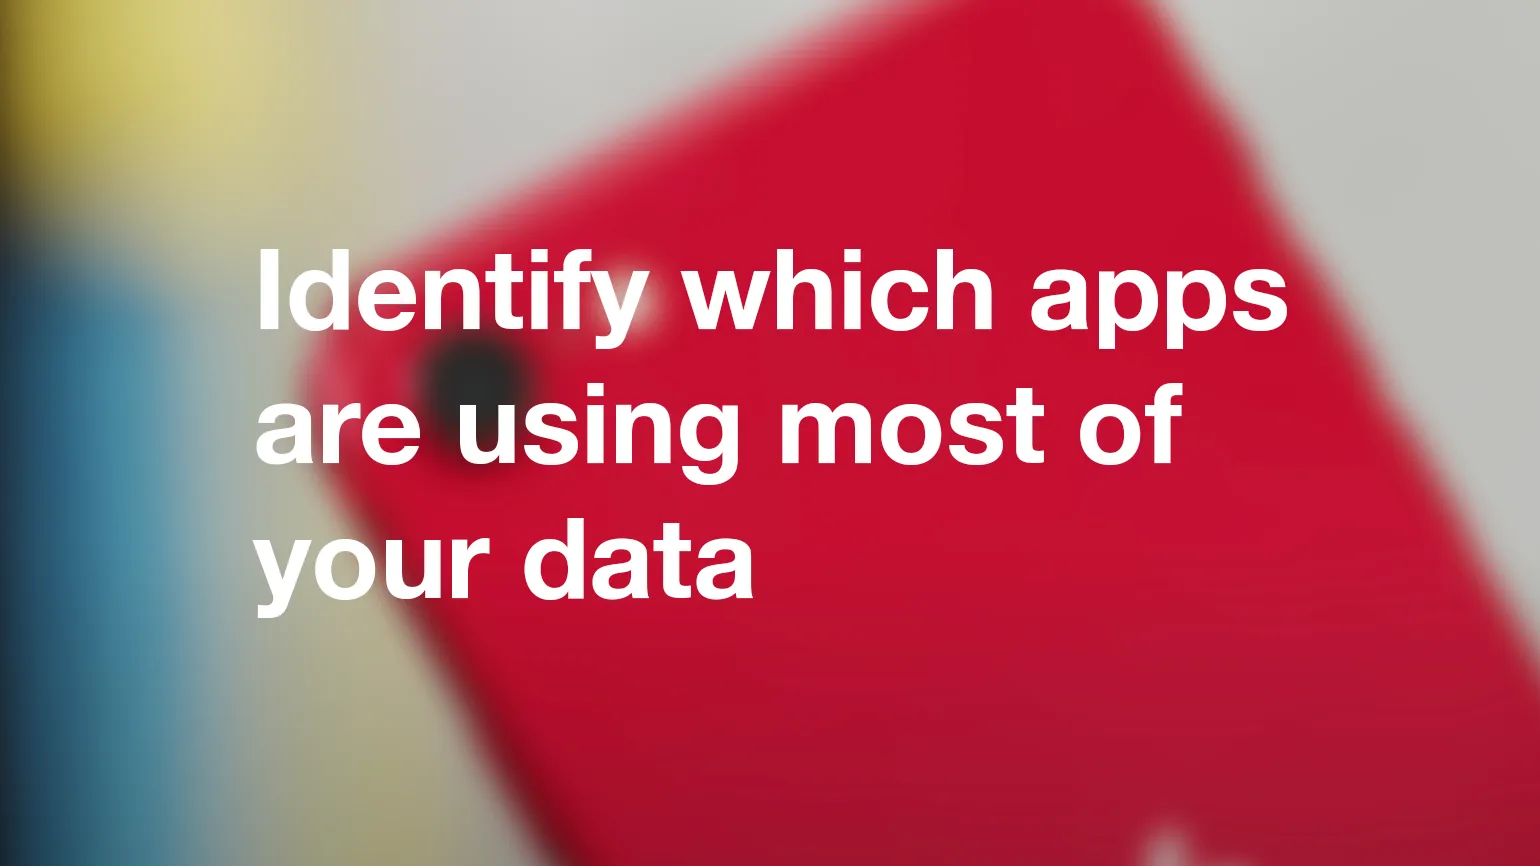 Identify which apps are using most of your data